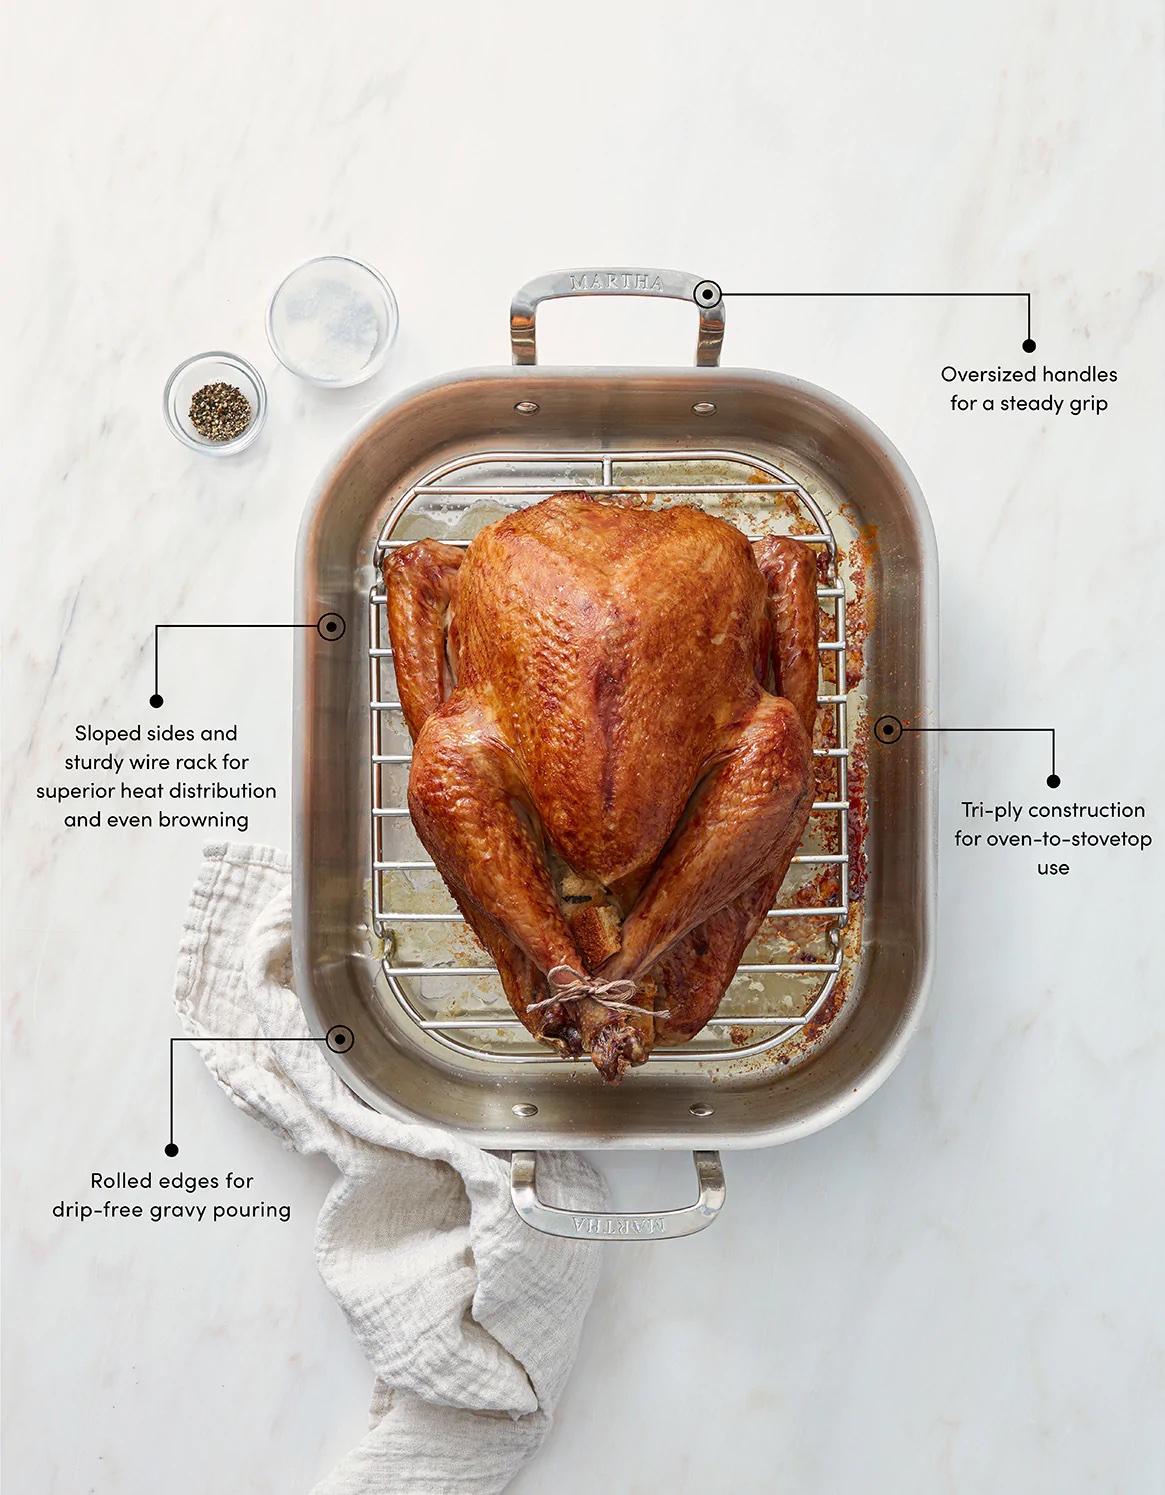 Thanksgiving 2021: 15 essentials to grab from QVC - Reviewed